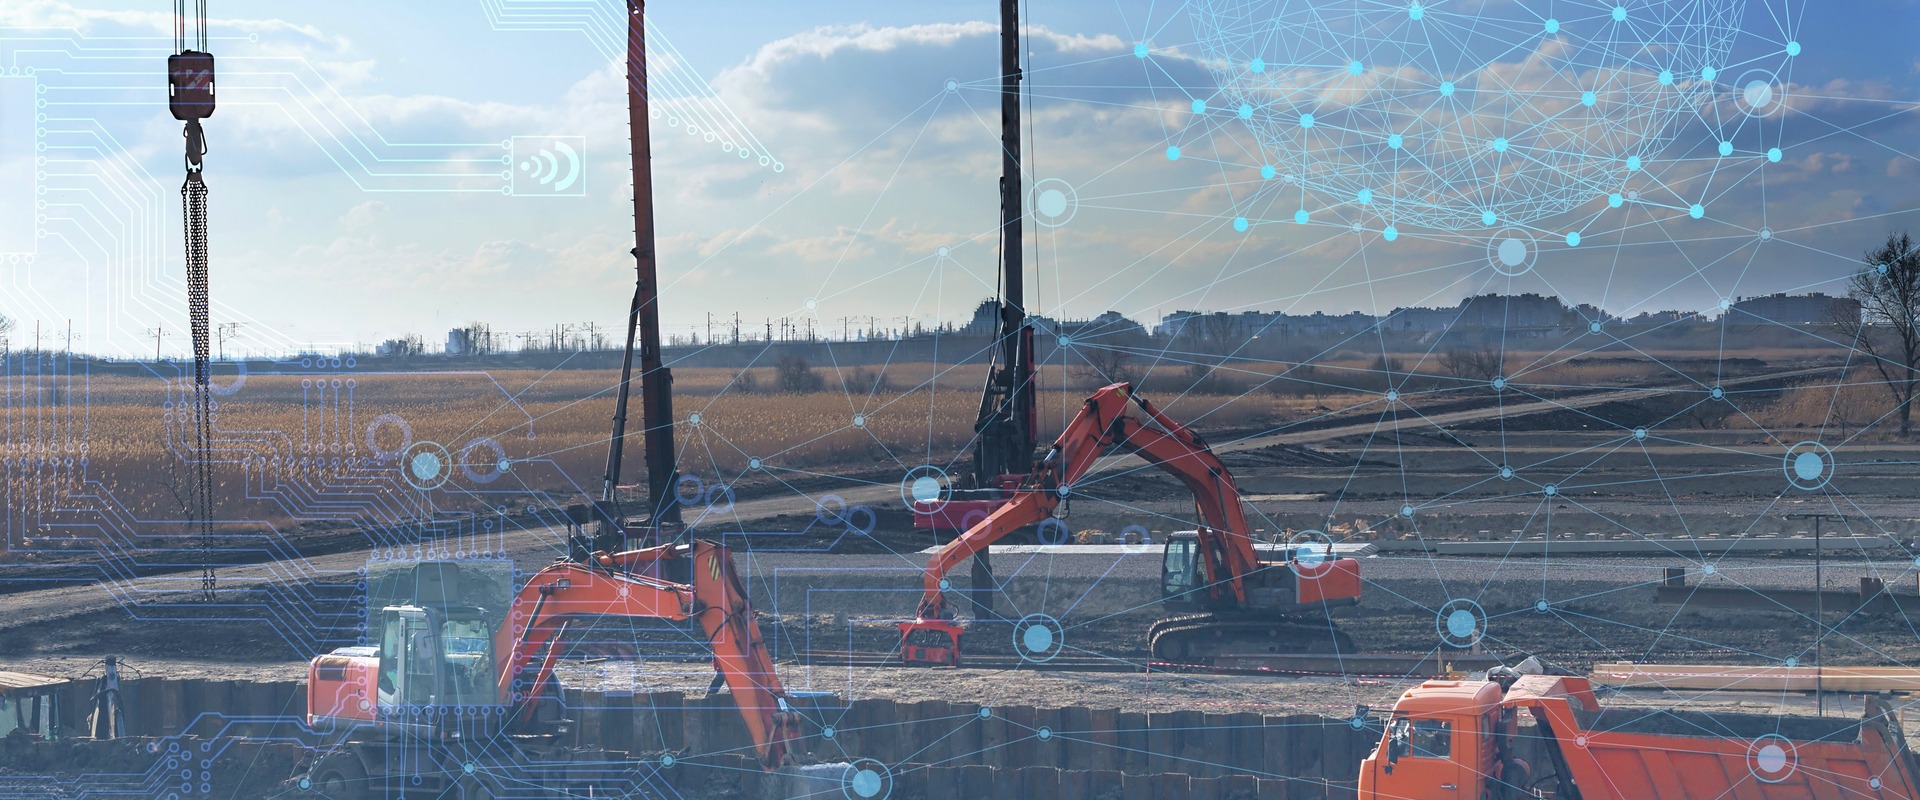 The Benefits of Using Machines in Construction: An Expert's Perspective